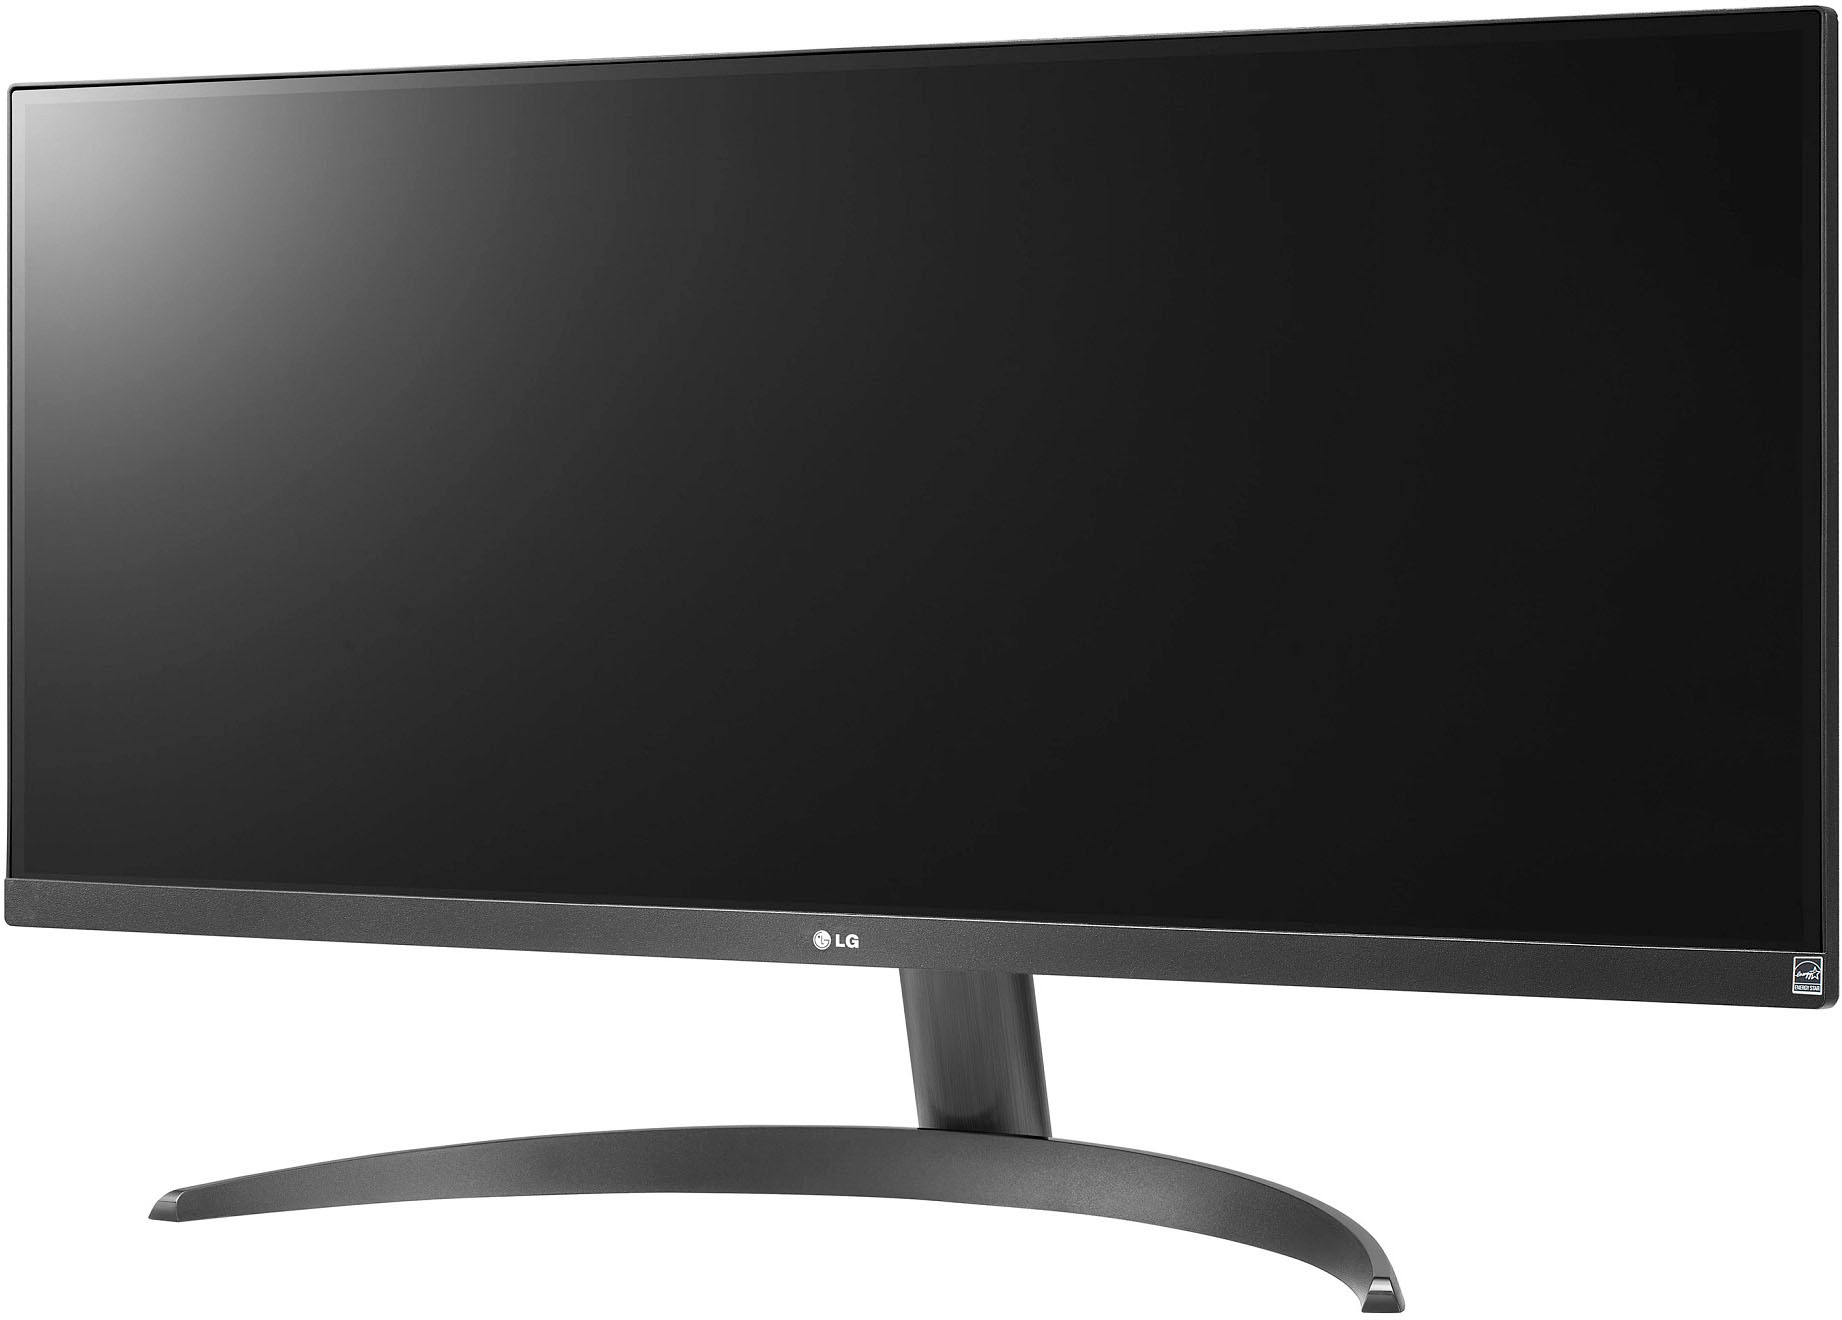 Back View: LG - 29” IPS LED UltraWide FHD 100Hz AMD FreeSync Monitor with HDR (HDMI, DisplayPort) - Black